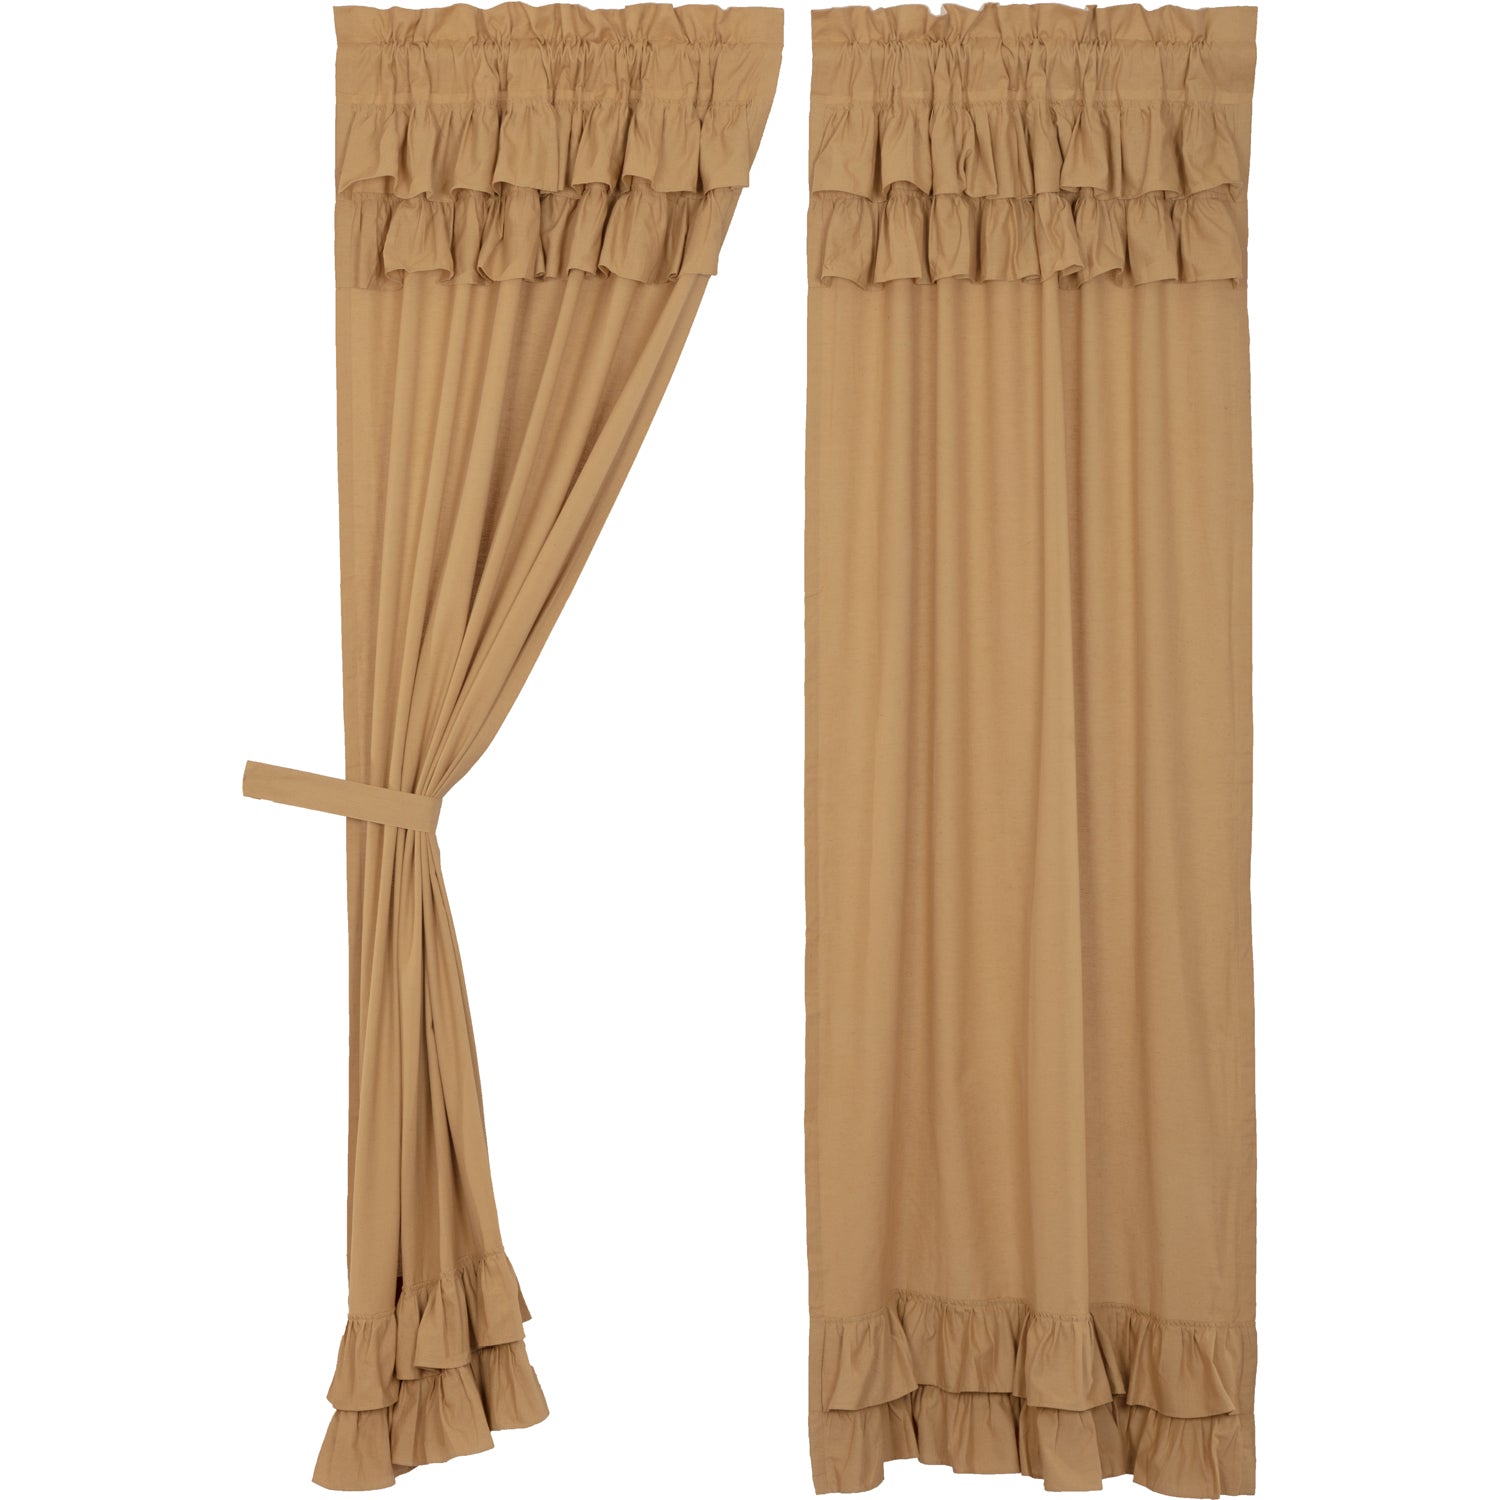 April & Olive Simple Life Flax Khaki Ruffled Panel Set of 2 84x40 By VHC Brands